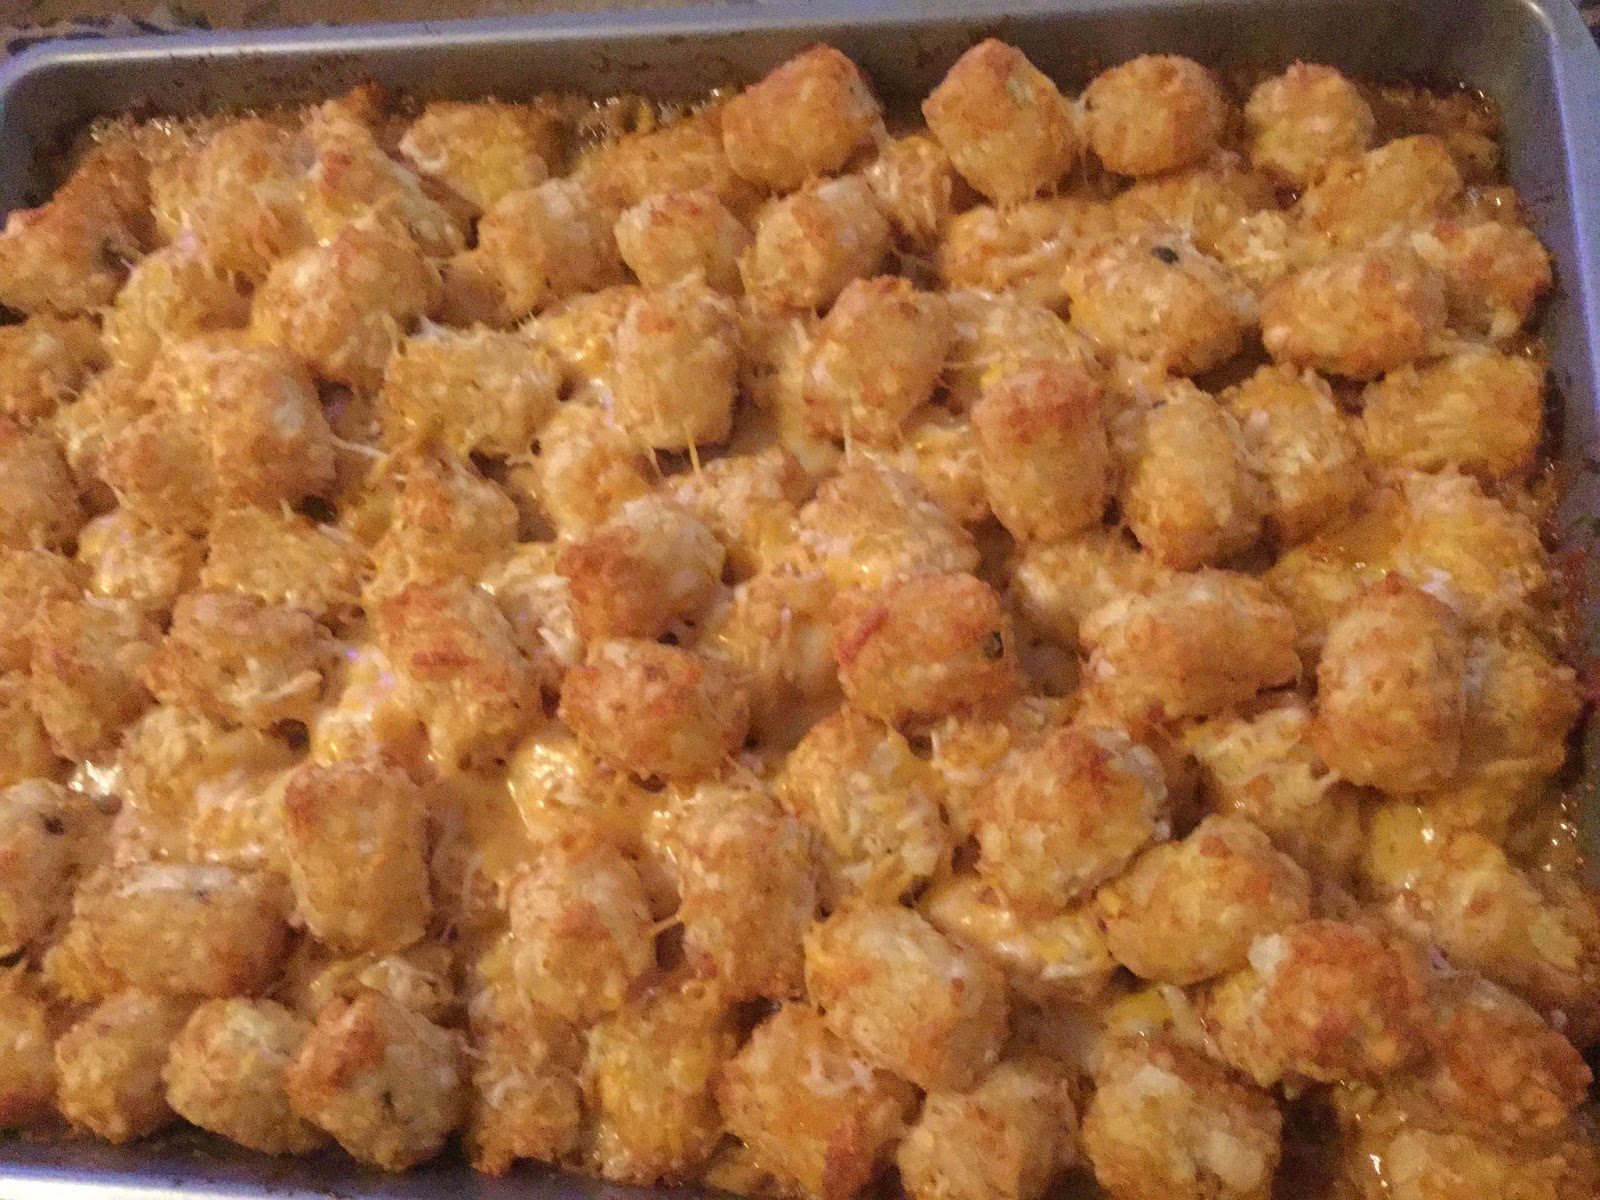 Countrified Hicks: Mexican Tater Tot Casserole